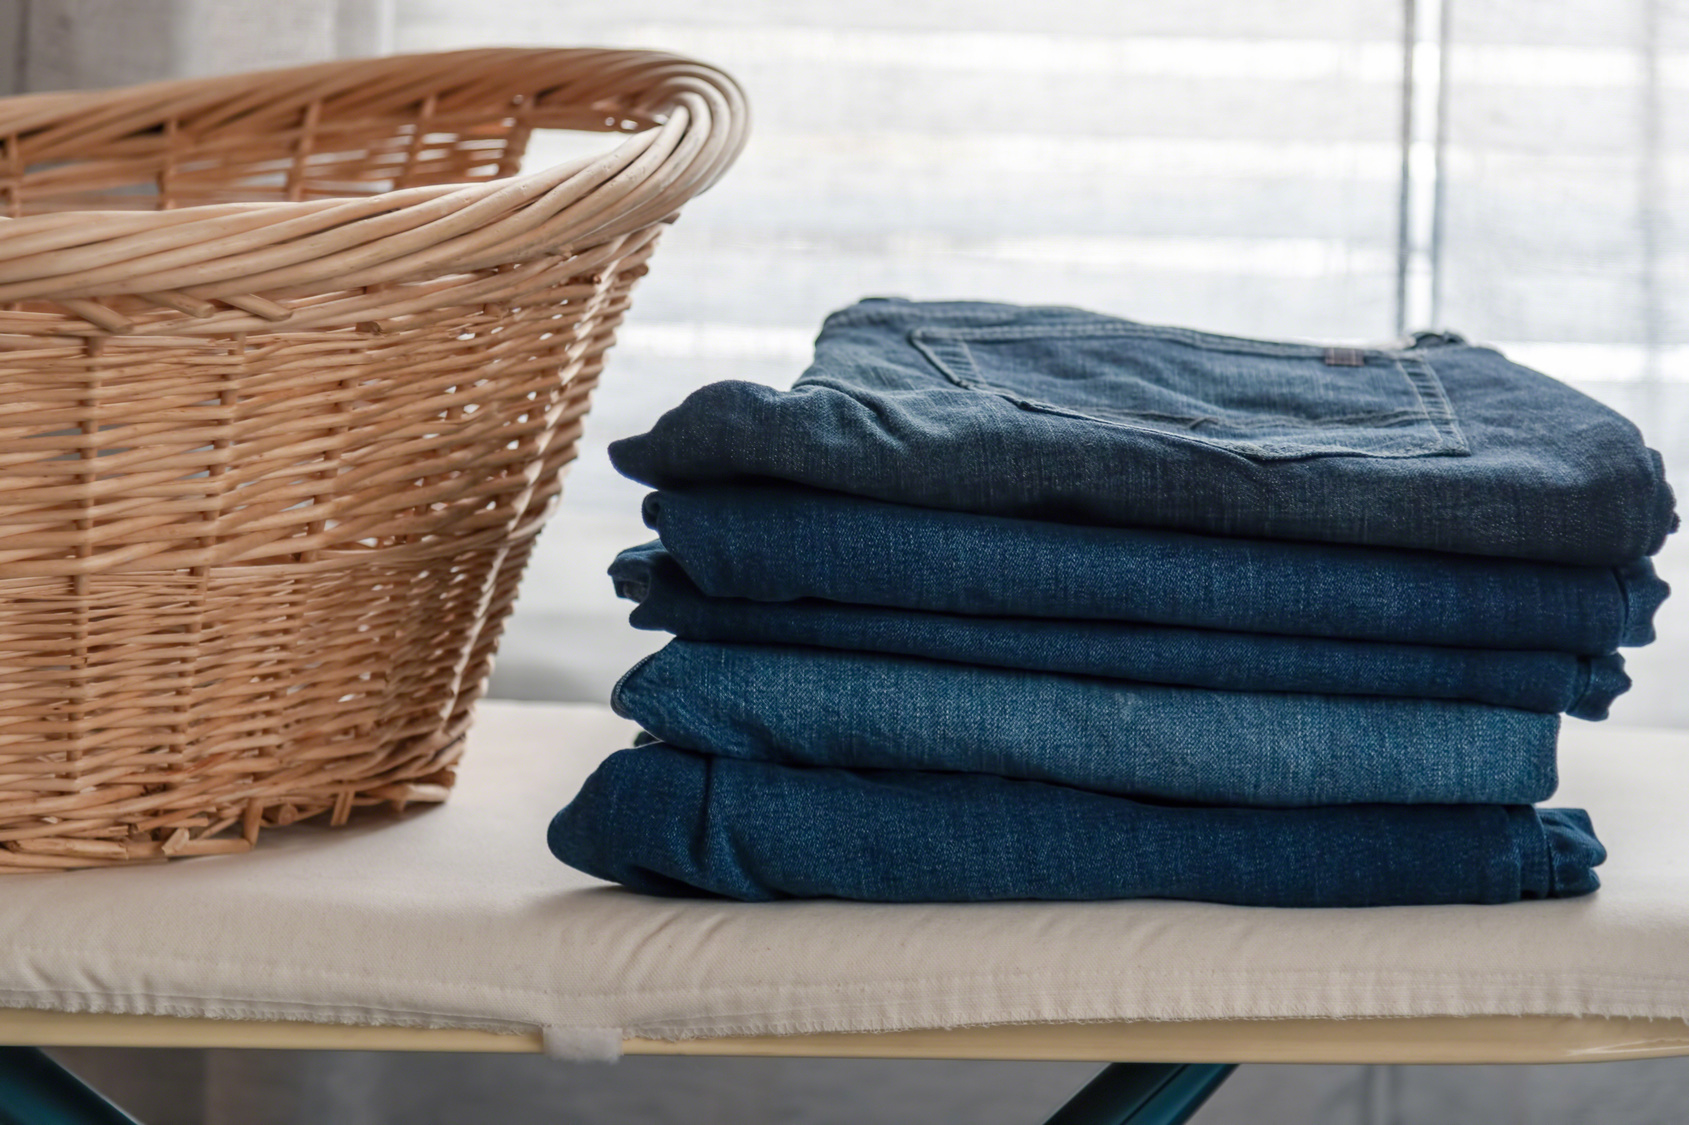 Tips for Washing and Folding Clothes With Efficiency